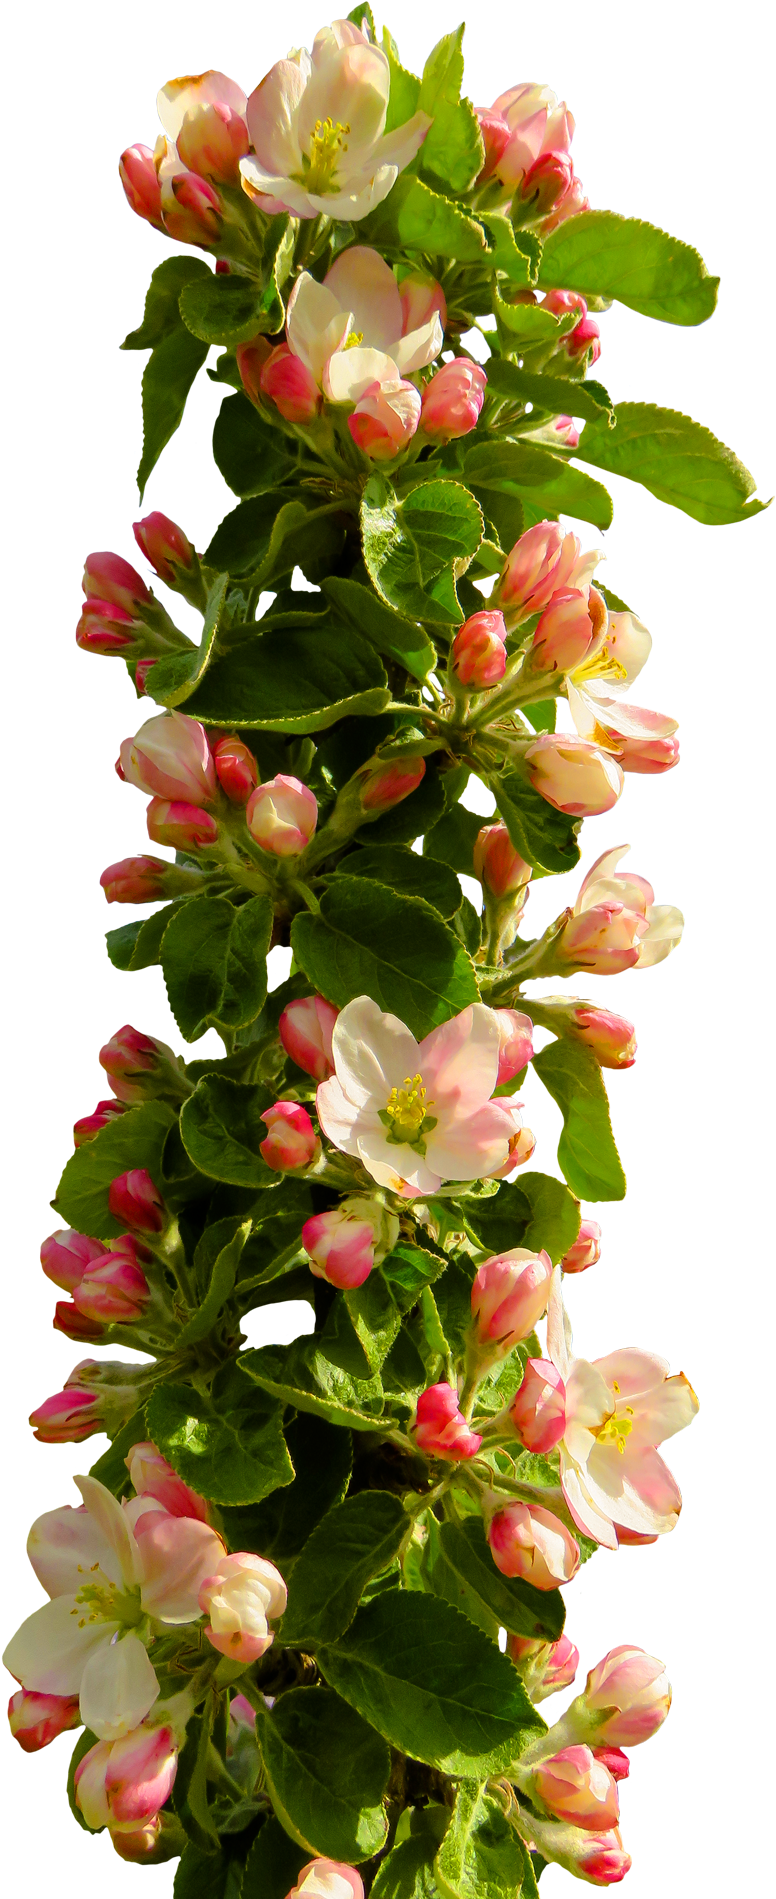 Download Spring Flower Png Flowers Png Images Hd Png Image With No Background Pngkey Com